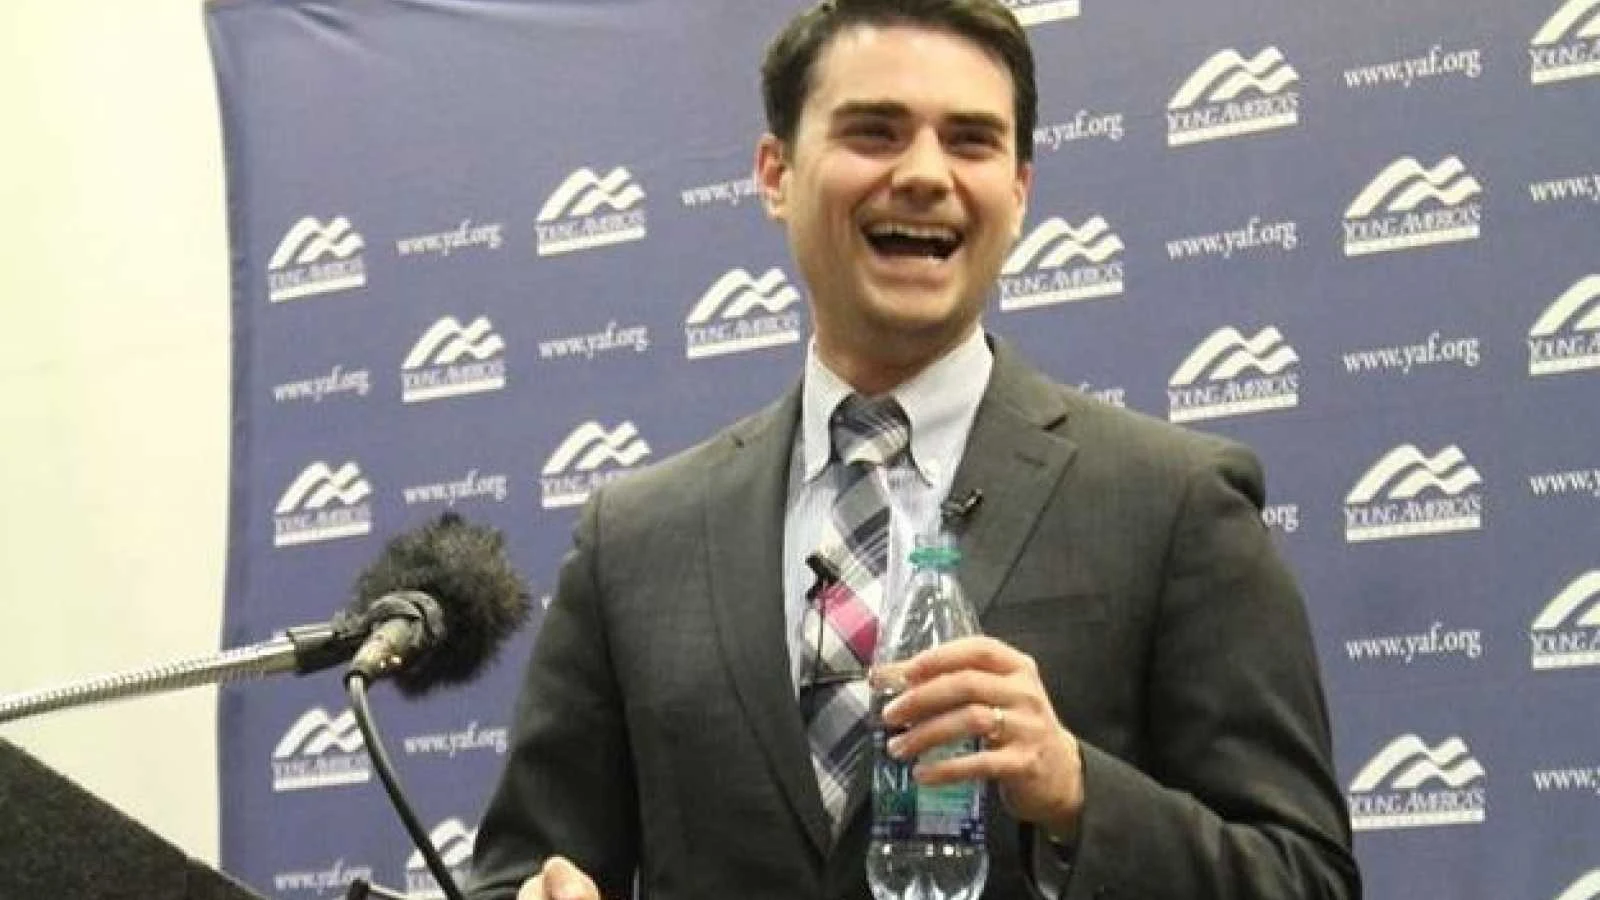 Pro-vax Ben Shapiro FINALLY admits he was wrong about vaccine safety and effectiveness – what took so long?